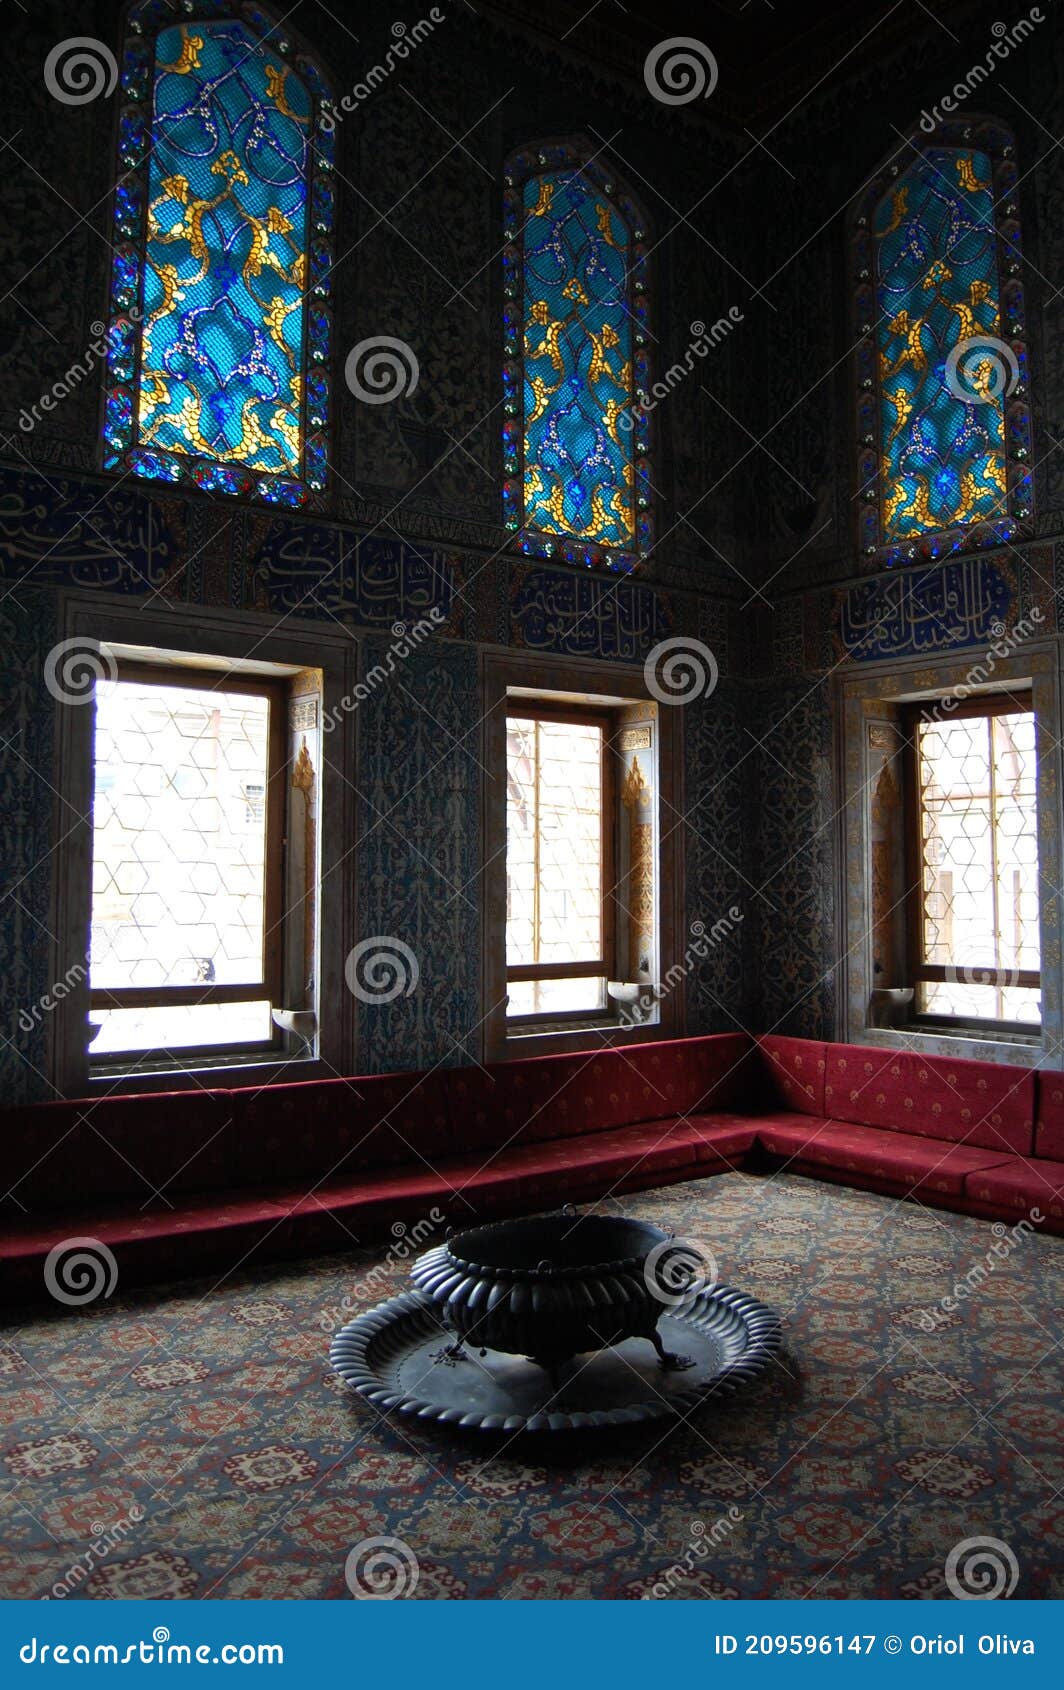 view of the topkapi palace, in istanbul turkey. harem